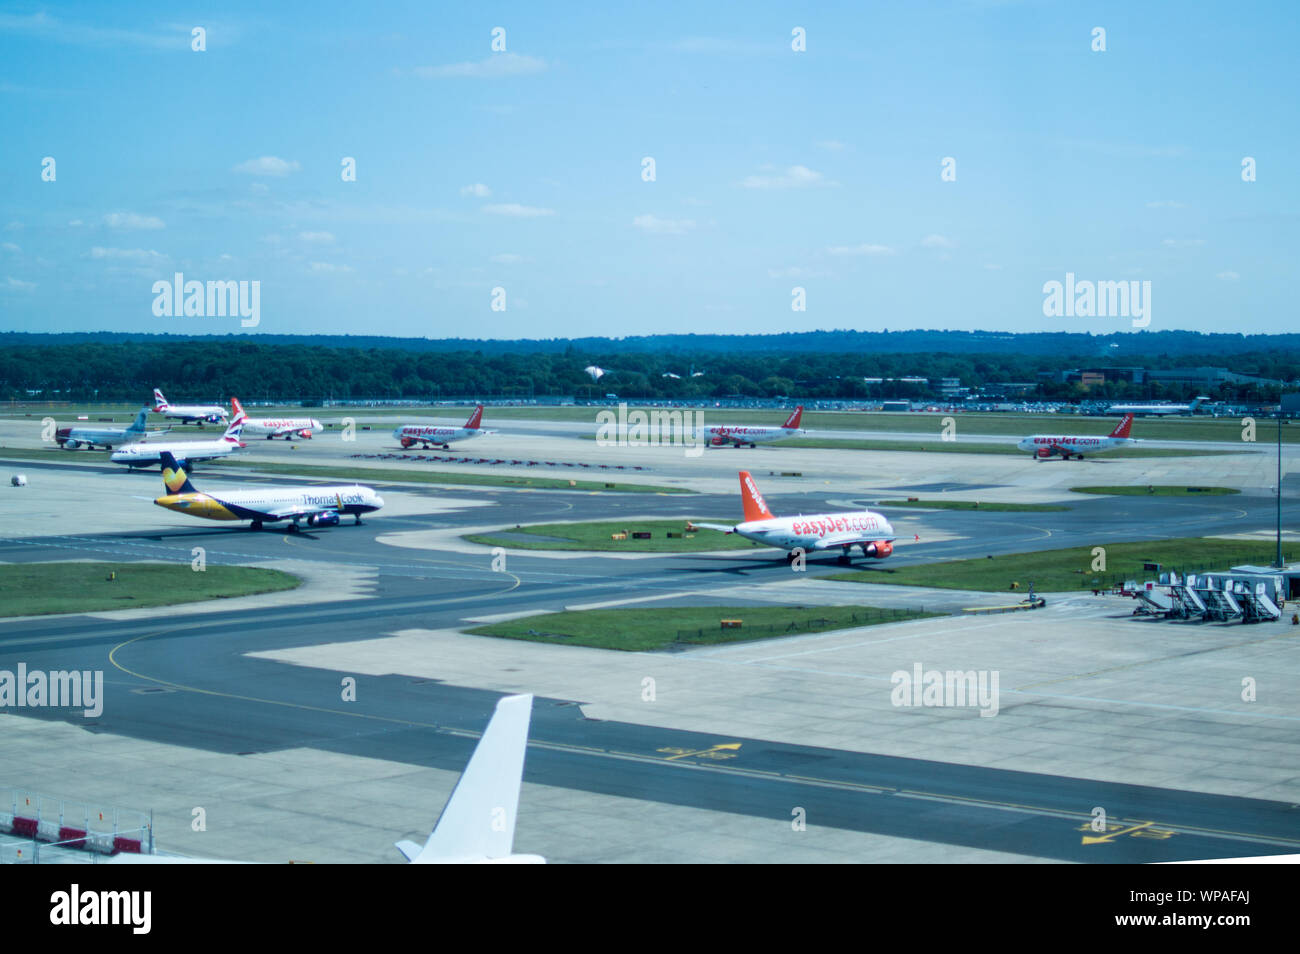 Easyjet, ThomasCook and British Airways planes line up at taxiway next to Gatwick runway for departure Stock Photo